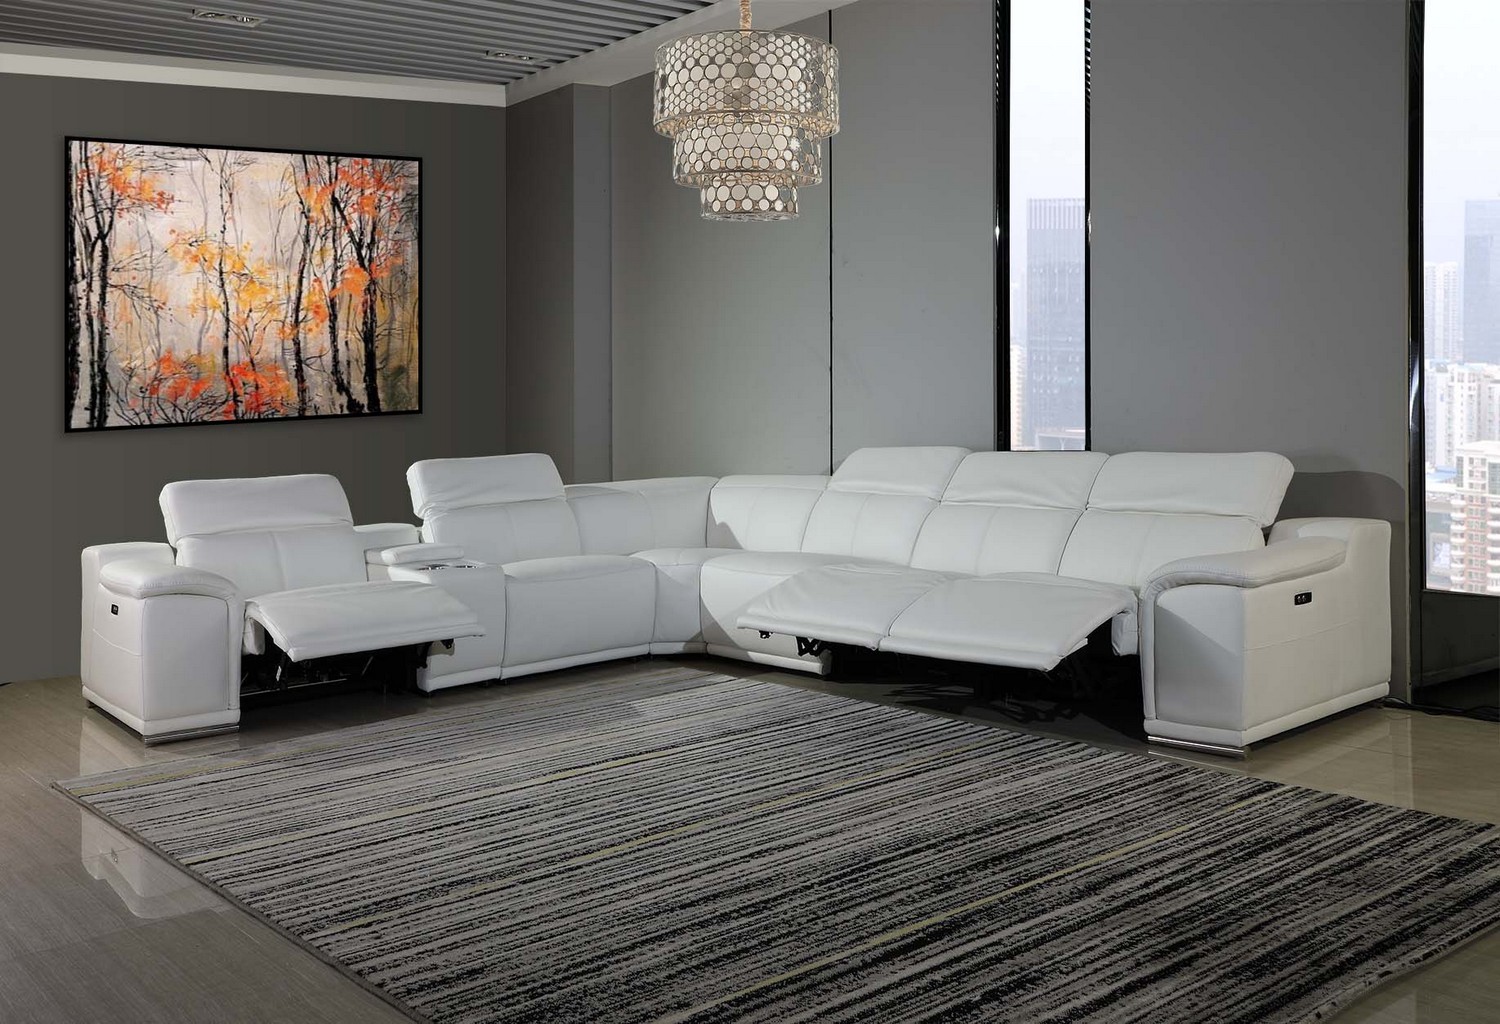 241" X 280" X 220" White Power Reclining 7PC Sectional with 1 Console